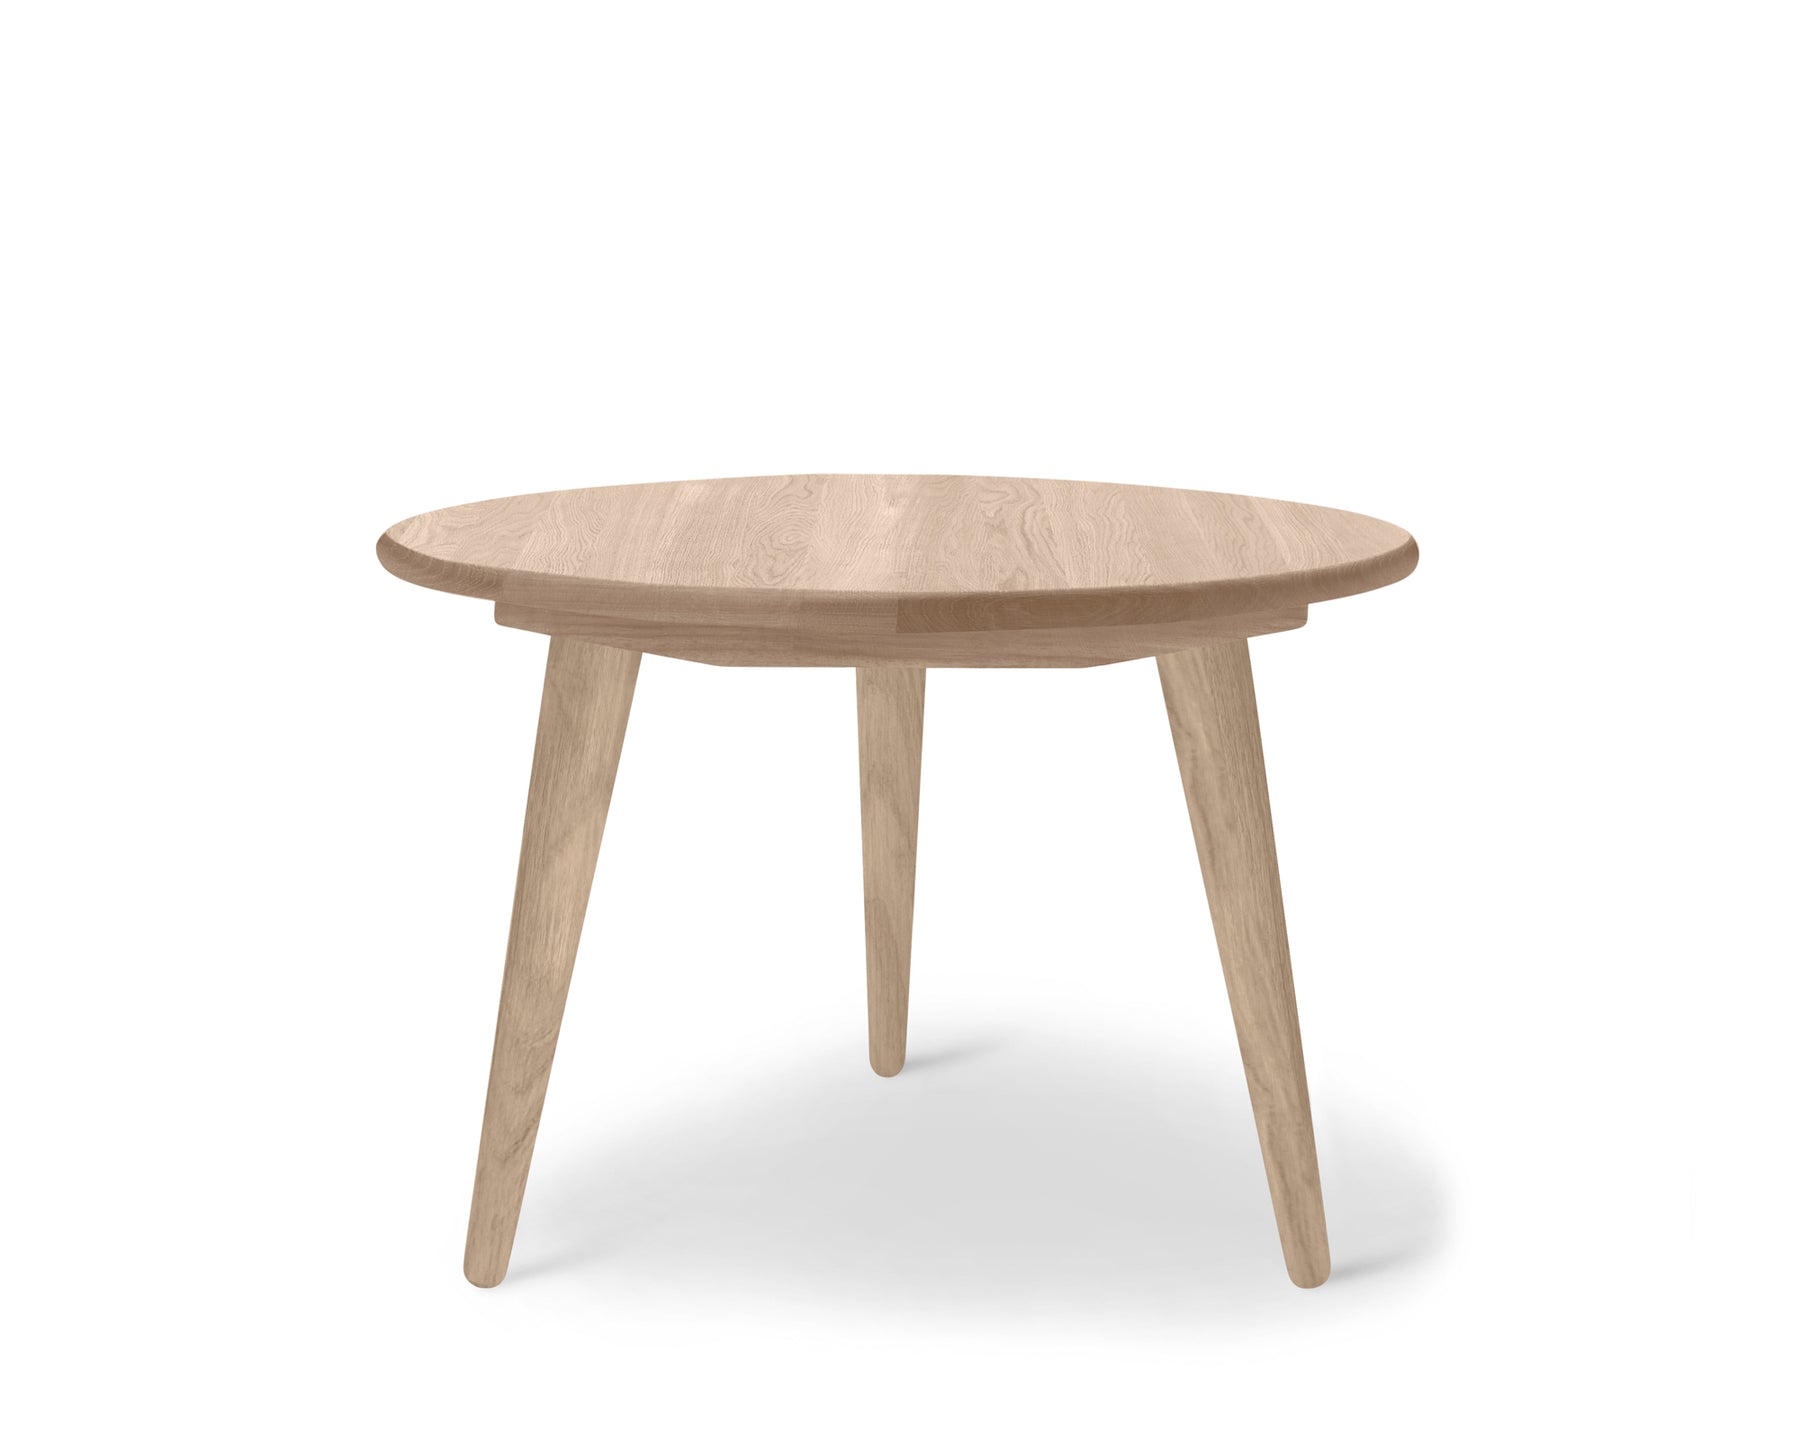 Small Round Wood Coffee Table | DSHOP